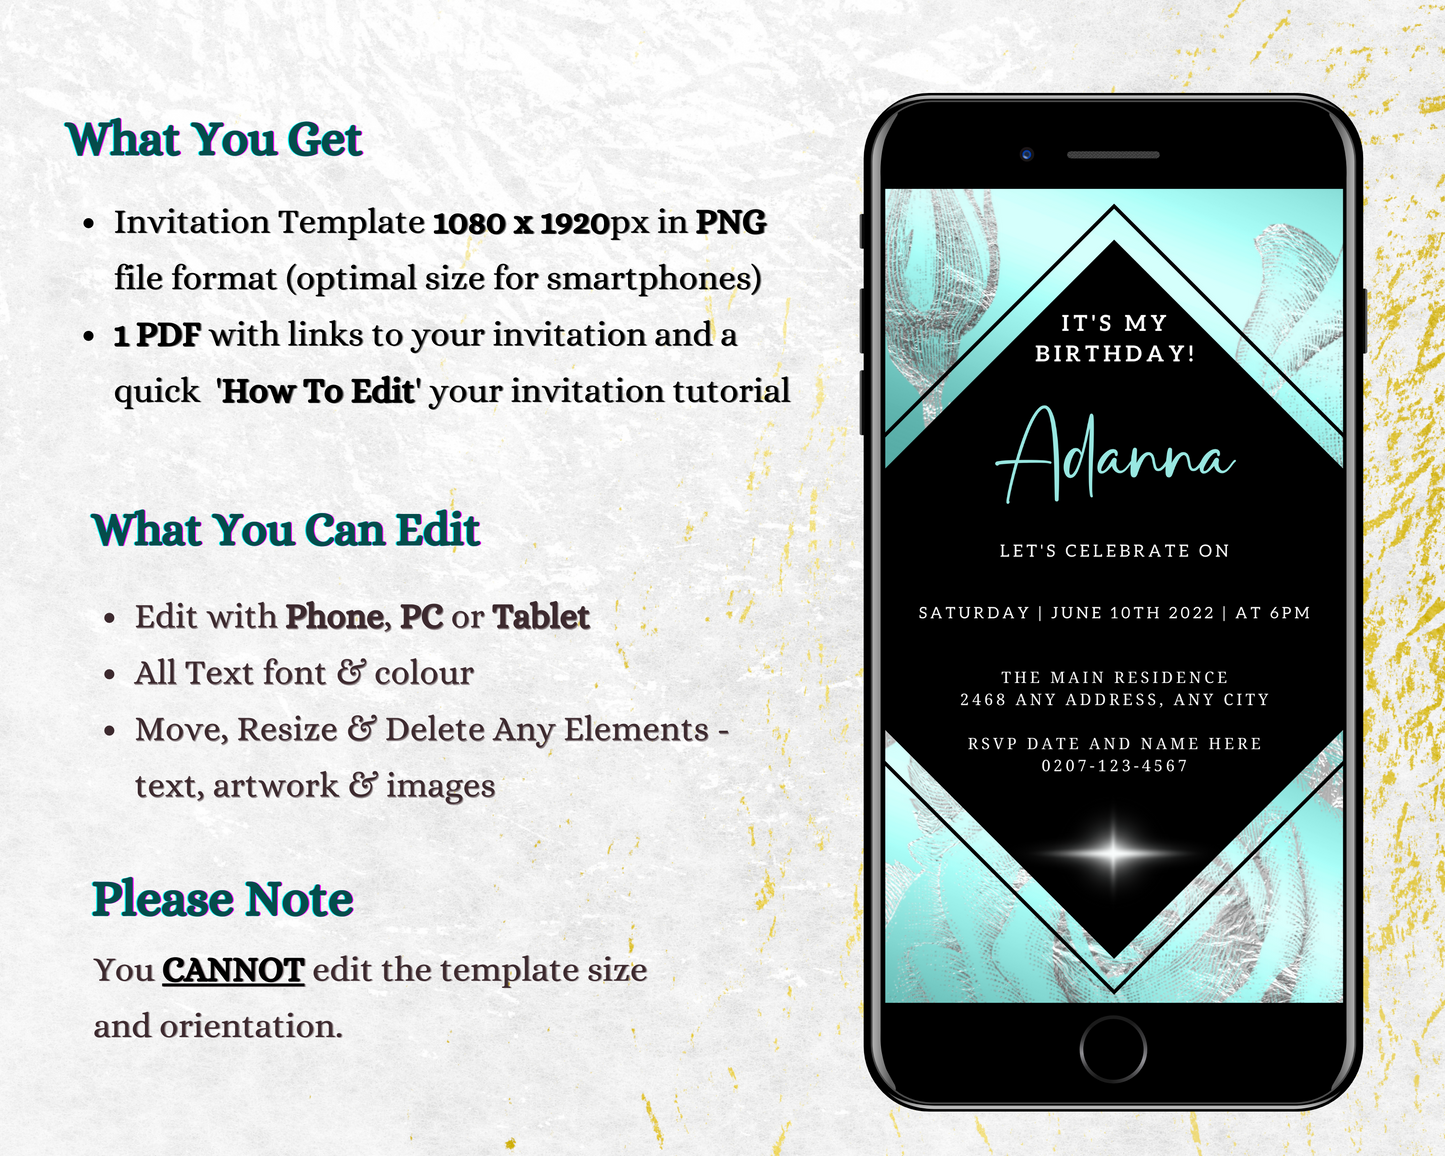 Customizable digital birthday evite featuring teal, black, and silver floral design displayed on a smartphone screen, with editable text and invitation details visible.